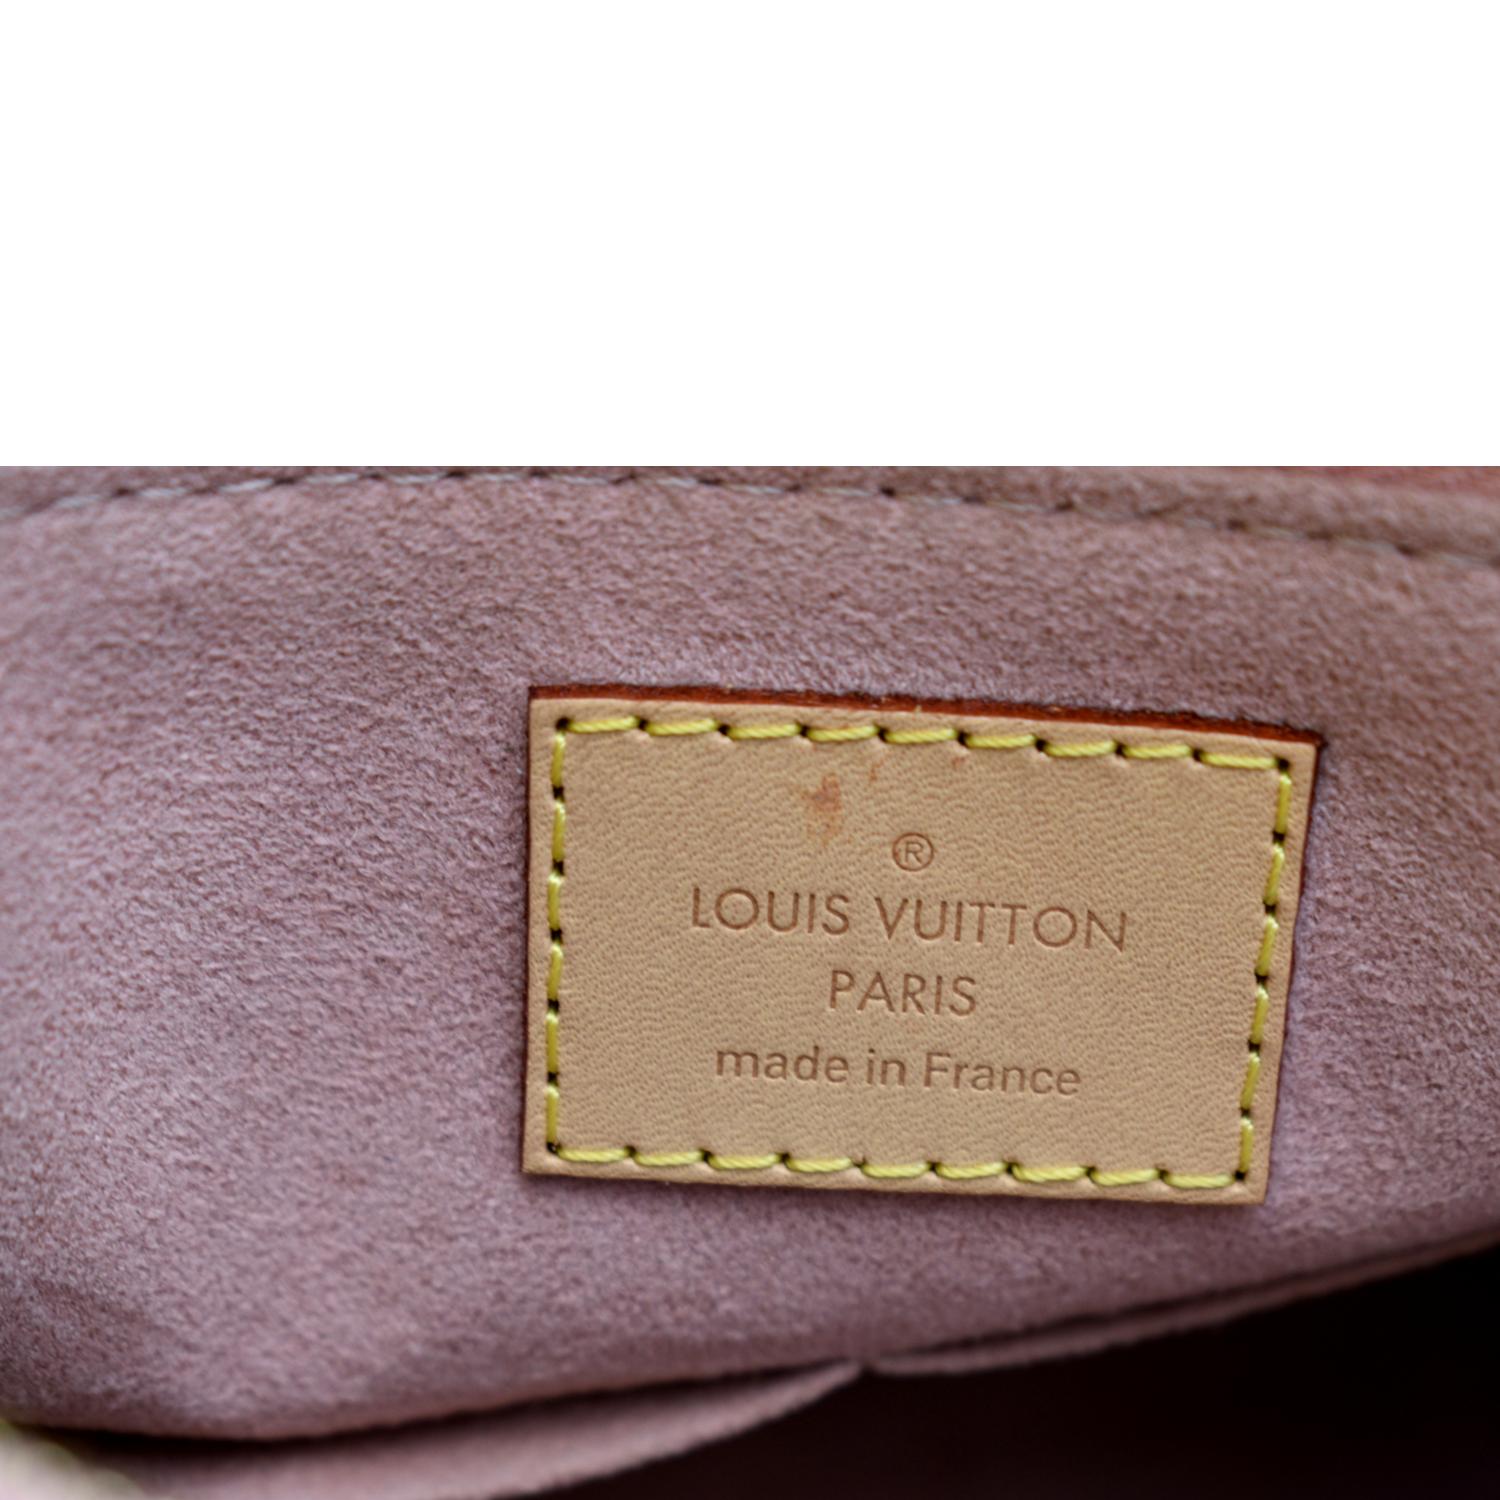 Louis Vuitton Brown Monogram Coated Canvas and Pink and White Leather V Tote Bb Gold Hardware, 2020 (Like New), Brown/Pink/White Womens Handbag